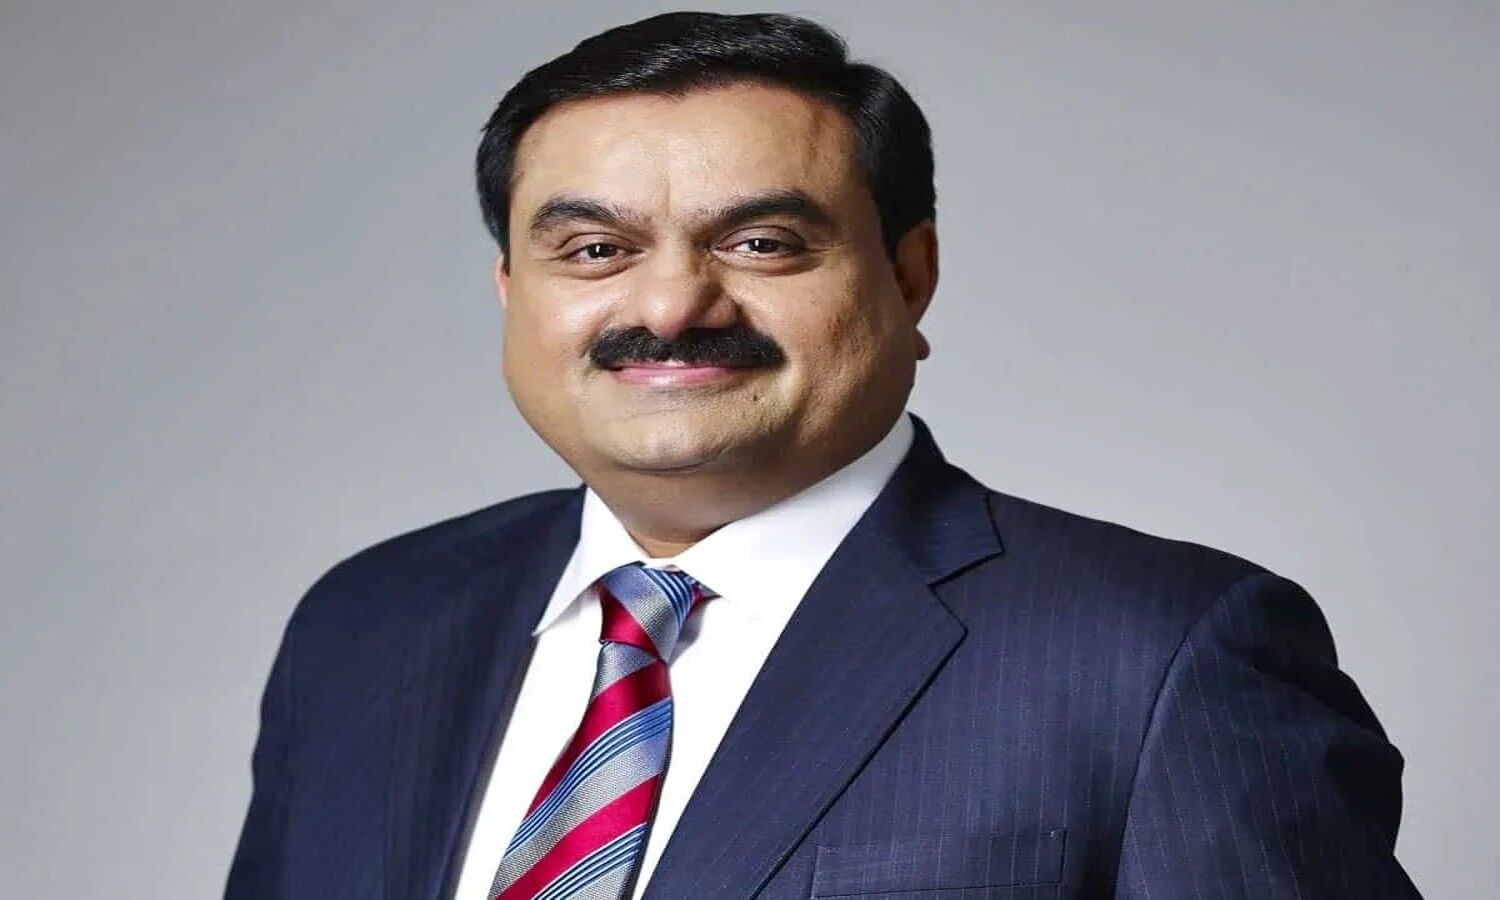 Adani 5G: Adani Group enters 5G sector, achieved 20 years of spectrum